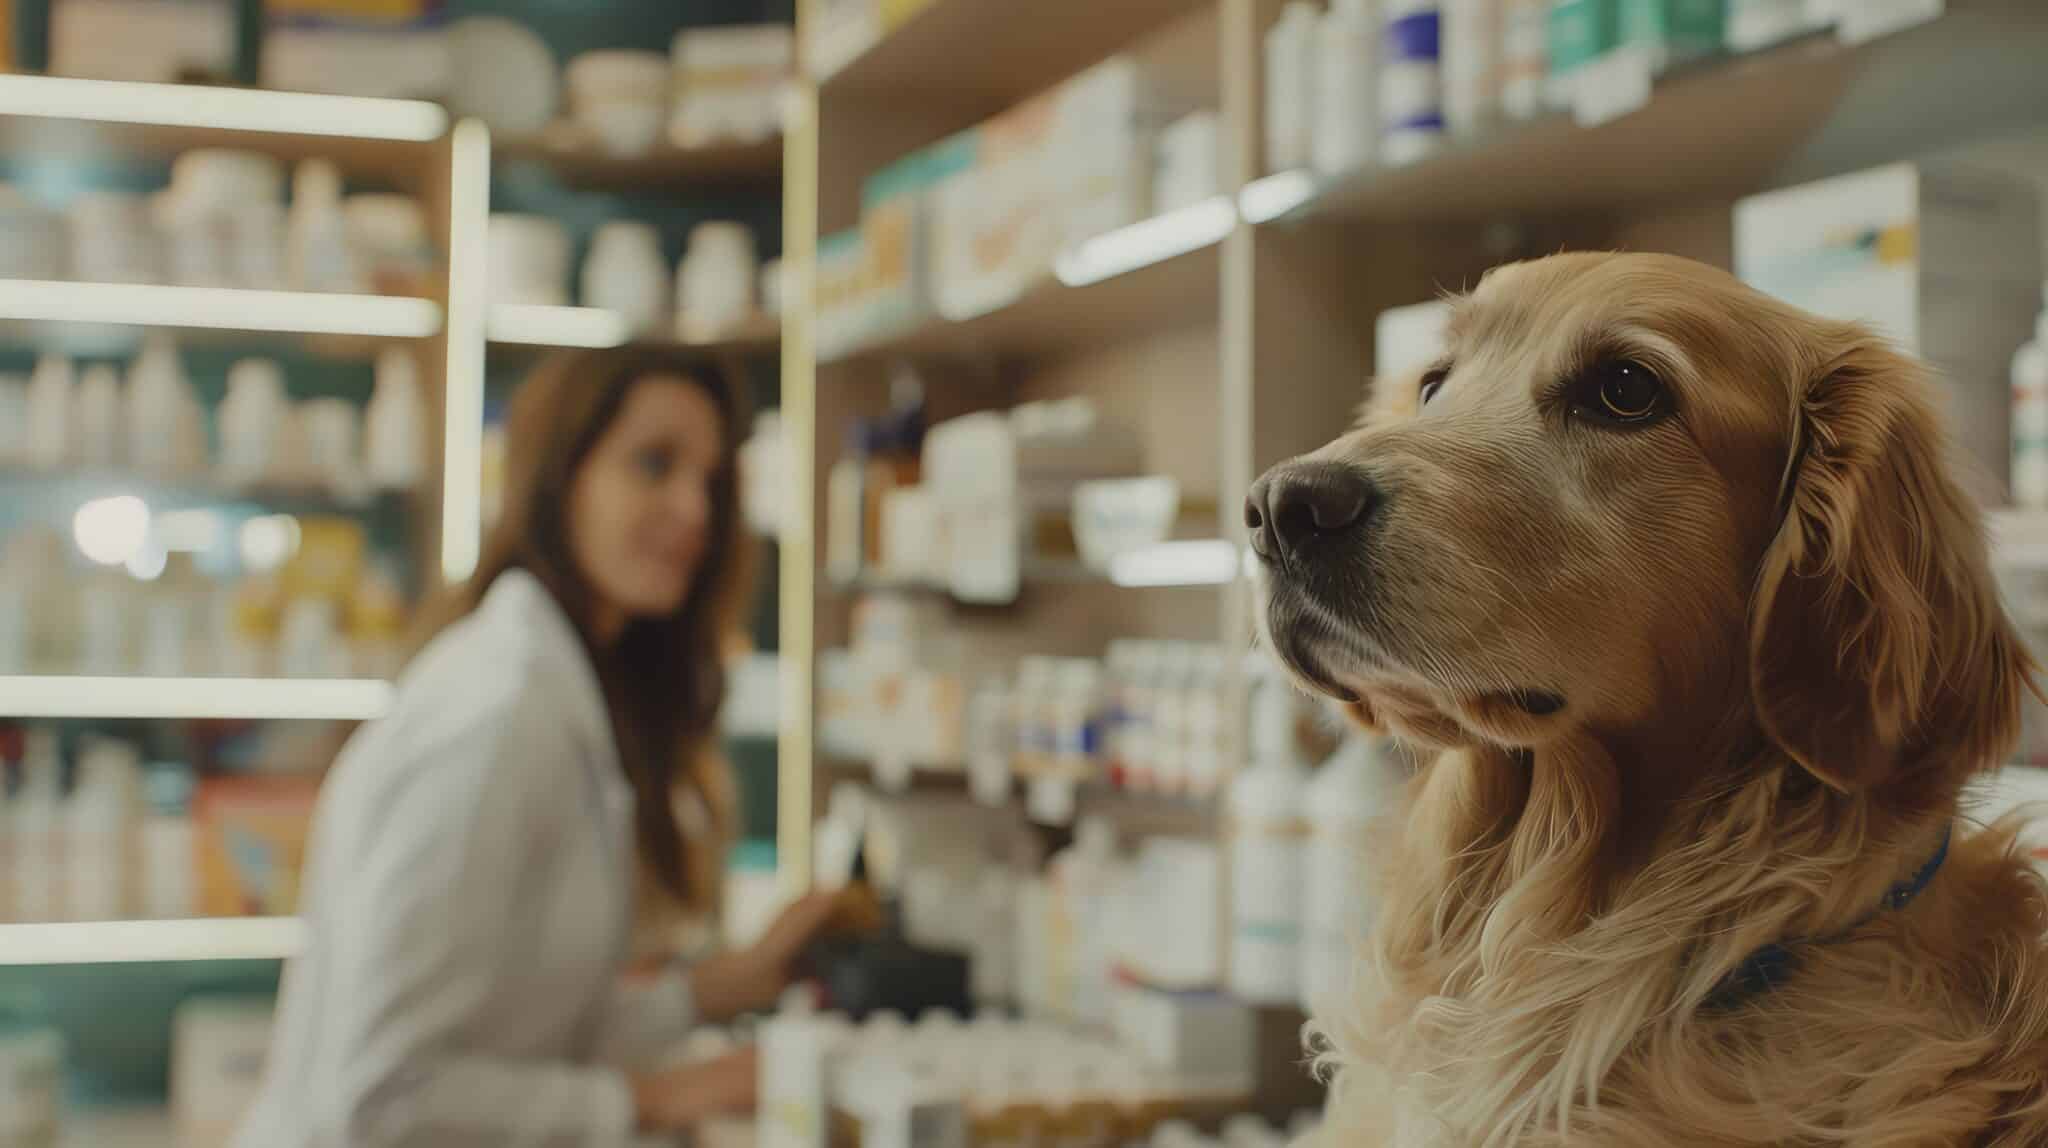 Golden Retriever waits attentively in a veterinary pharmacy, showcasing the personalized care aspect of a veterinary pharmacy career.